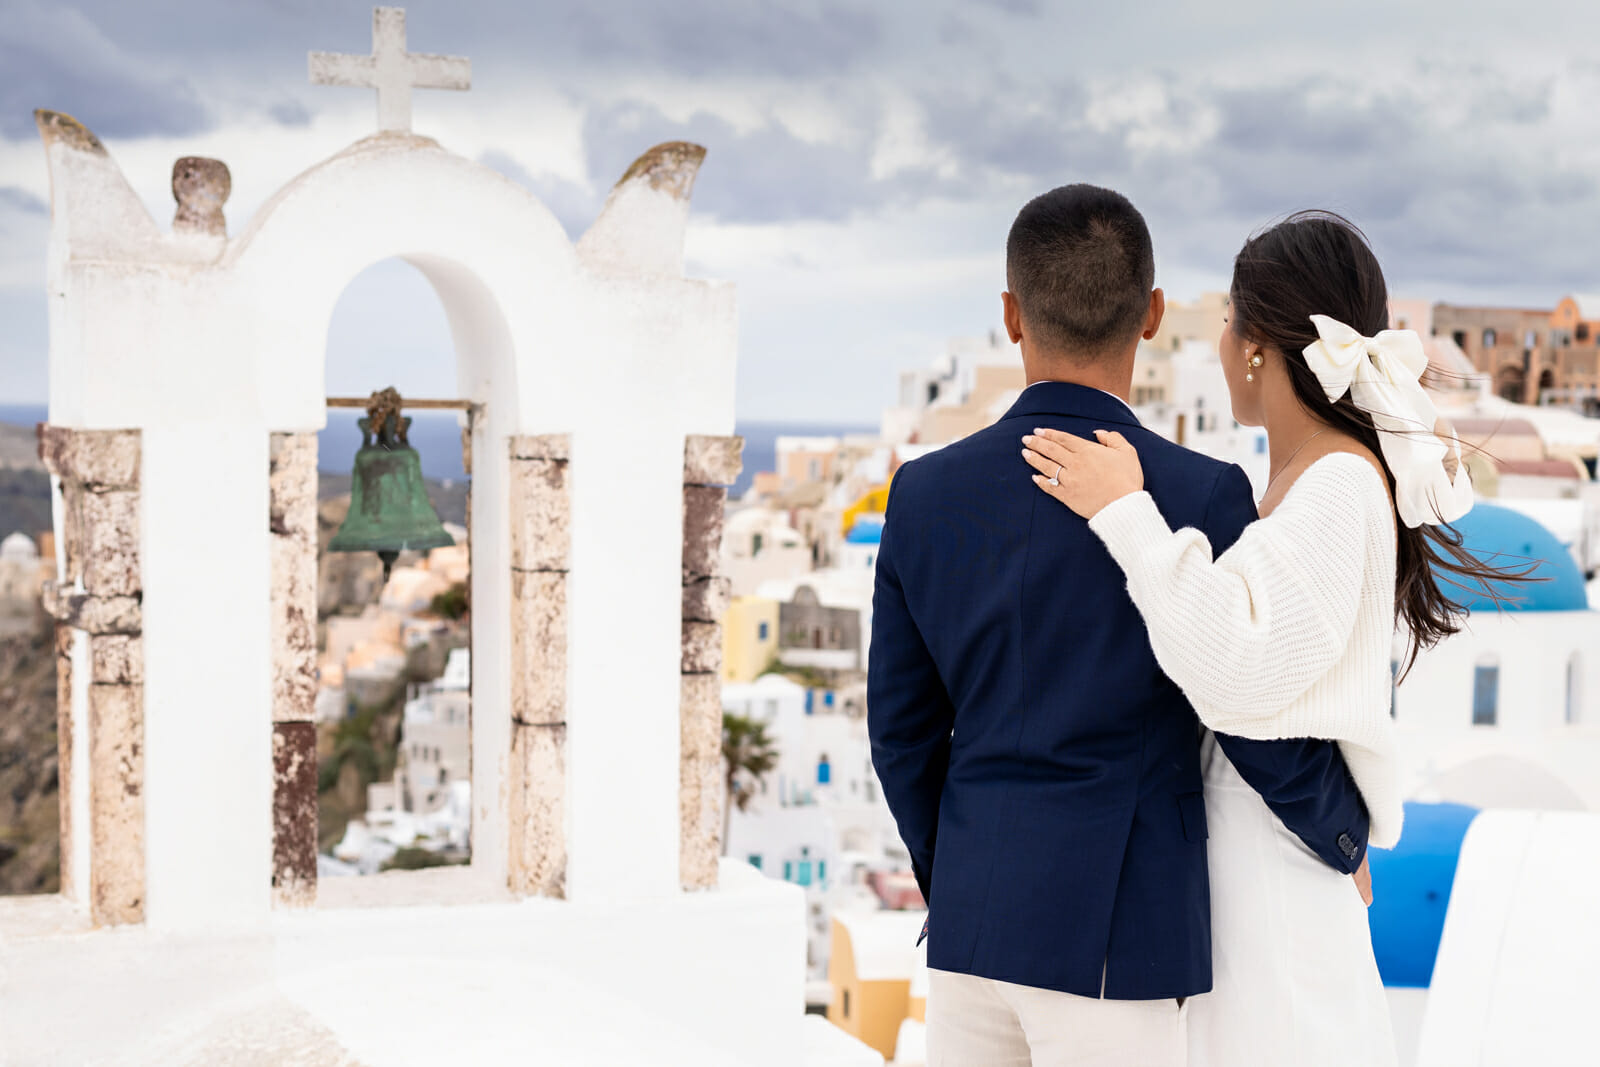 Dazzling Santorini photoshoot in Oia during the Golden Hour